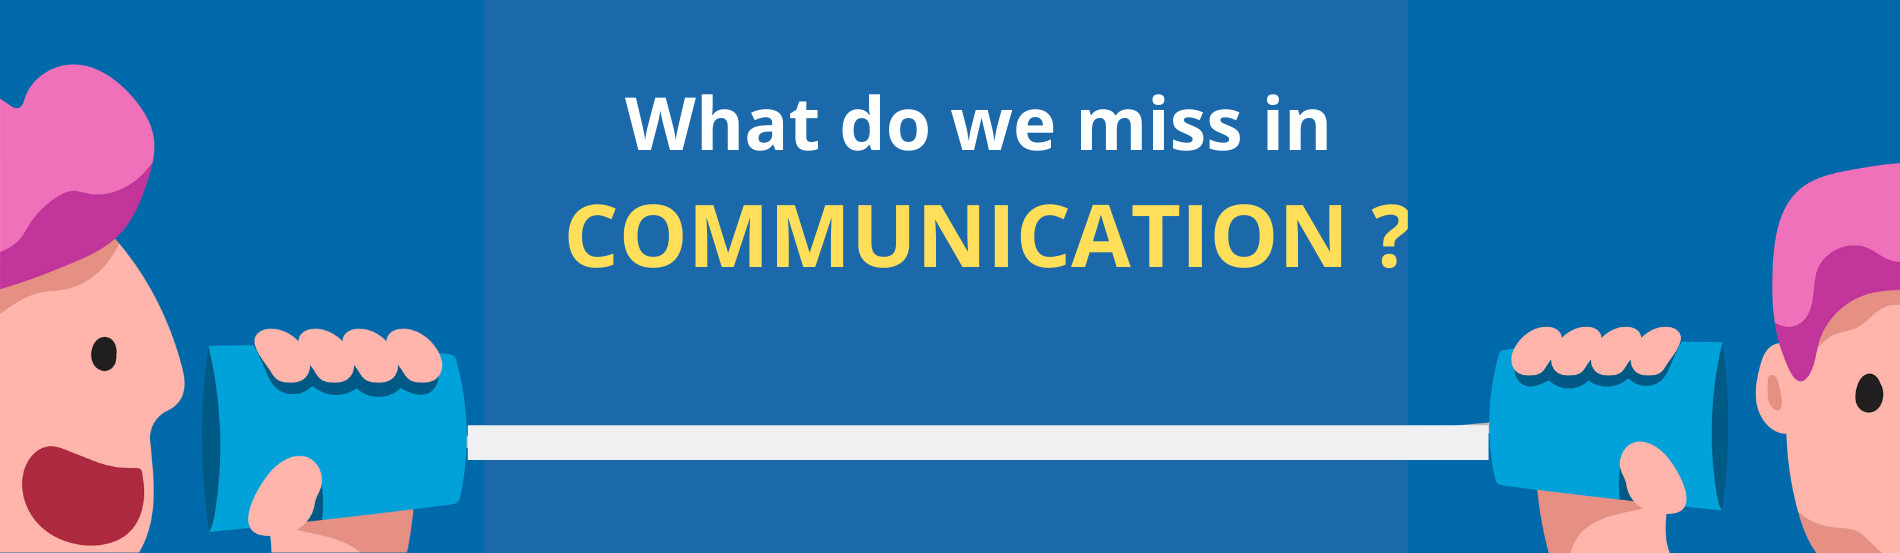 what do we miss in communication